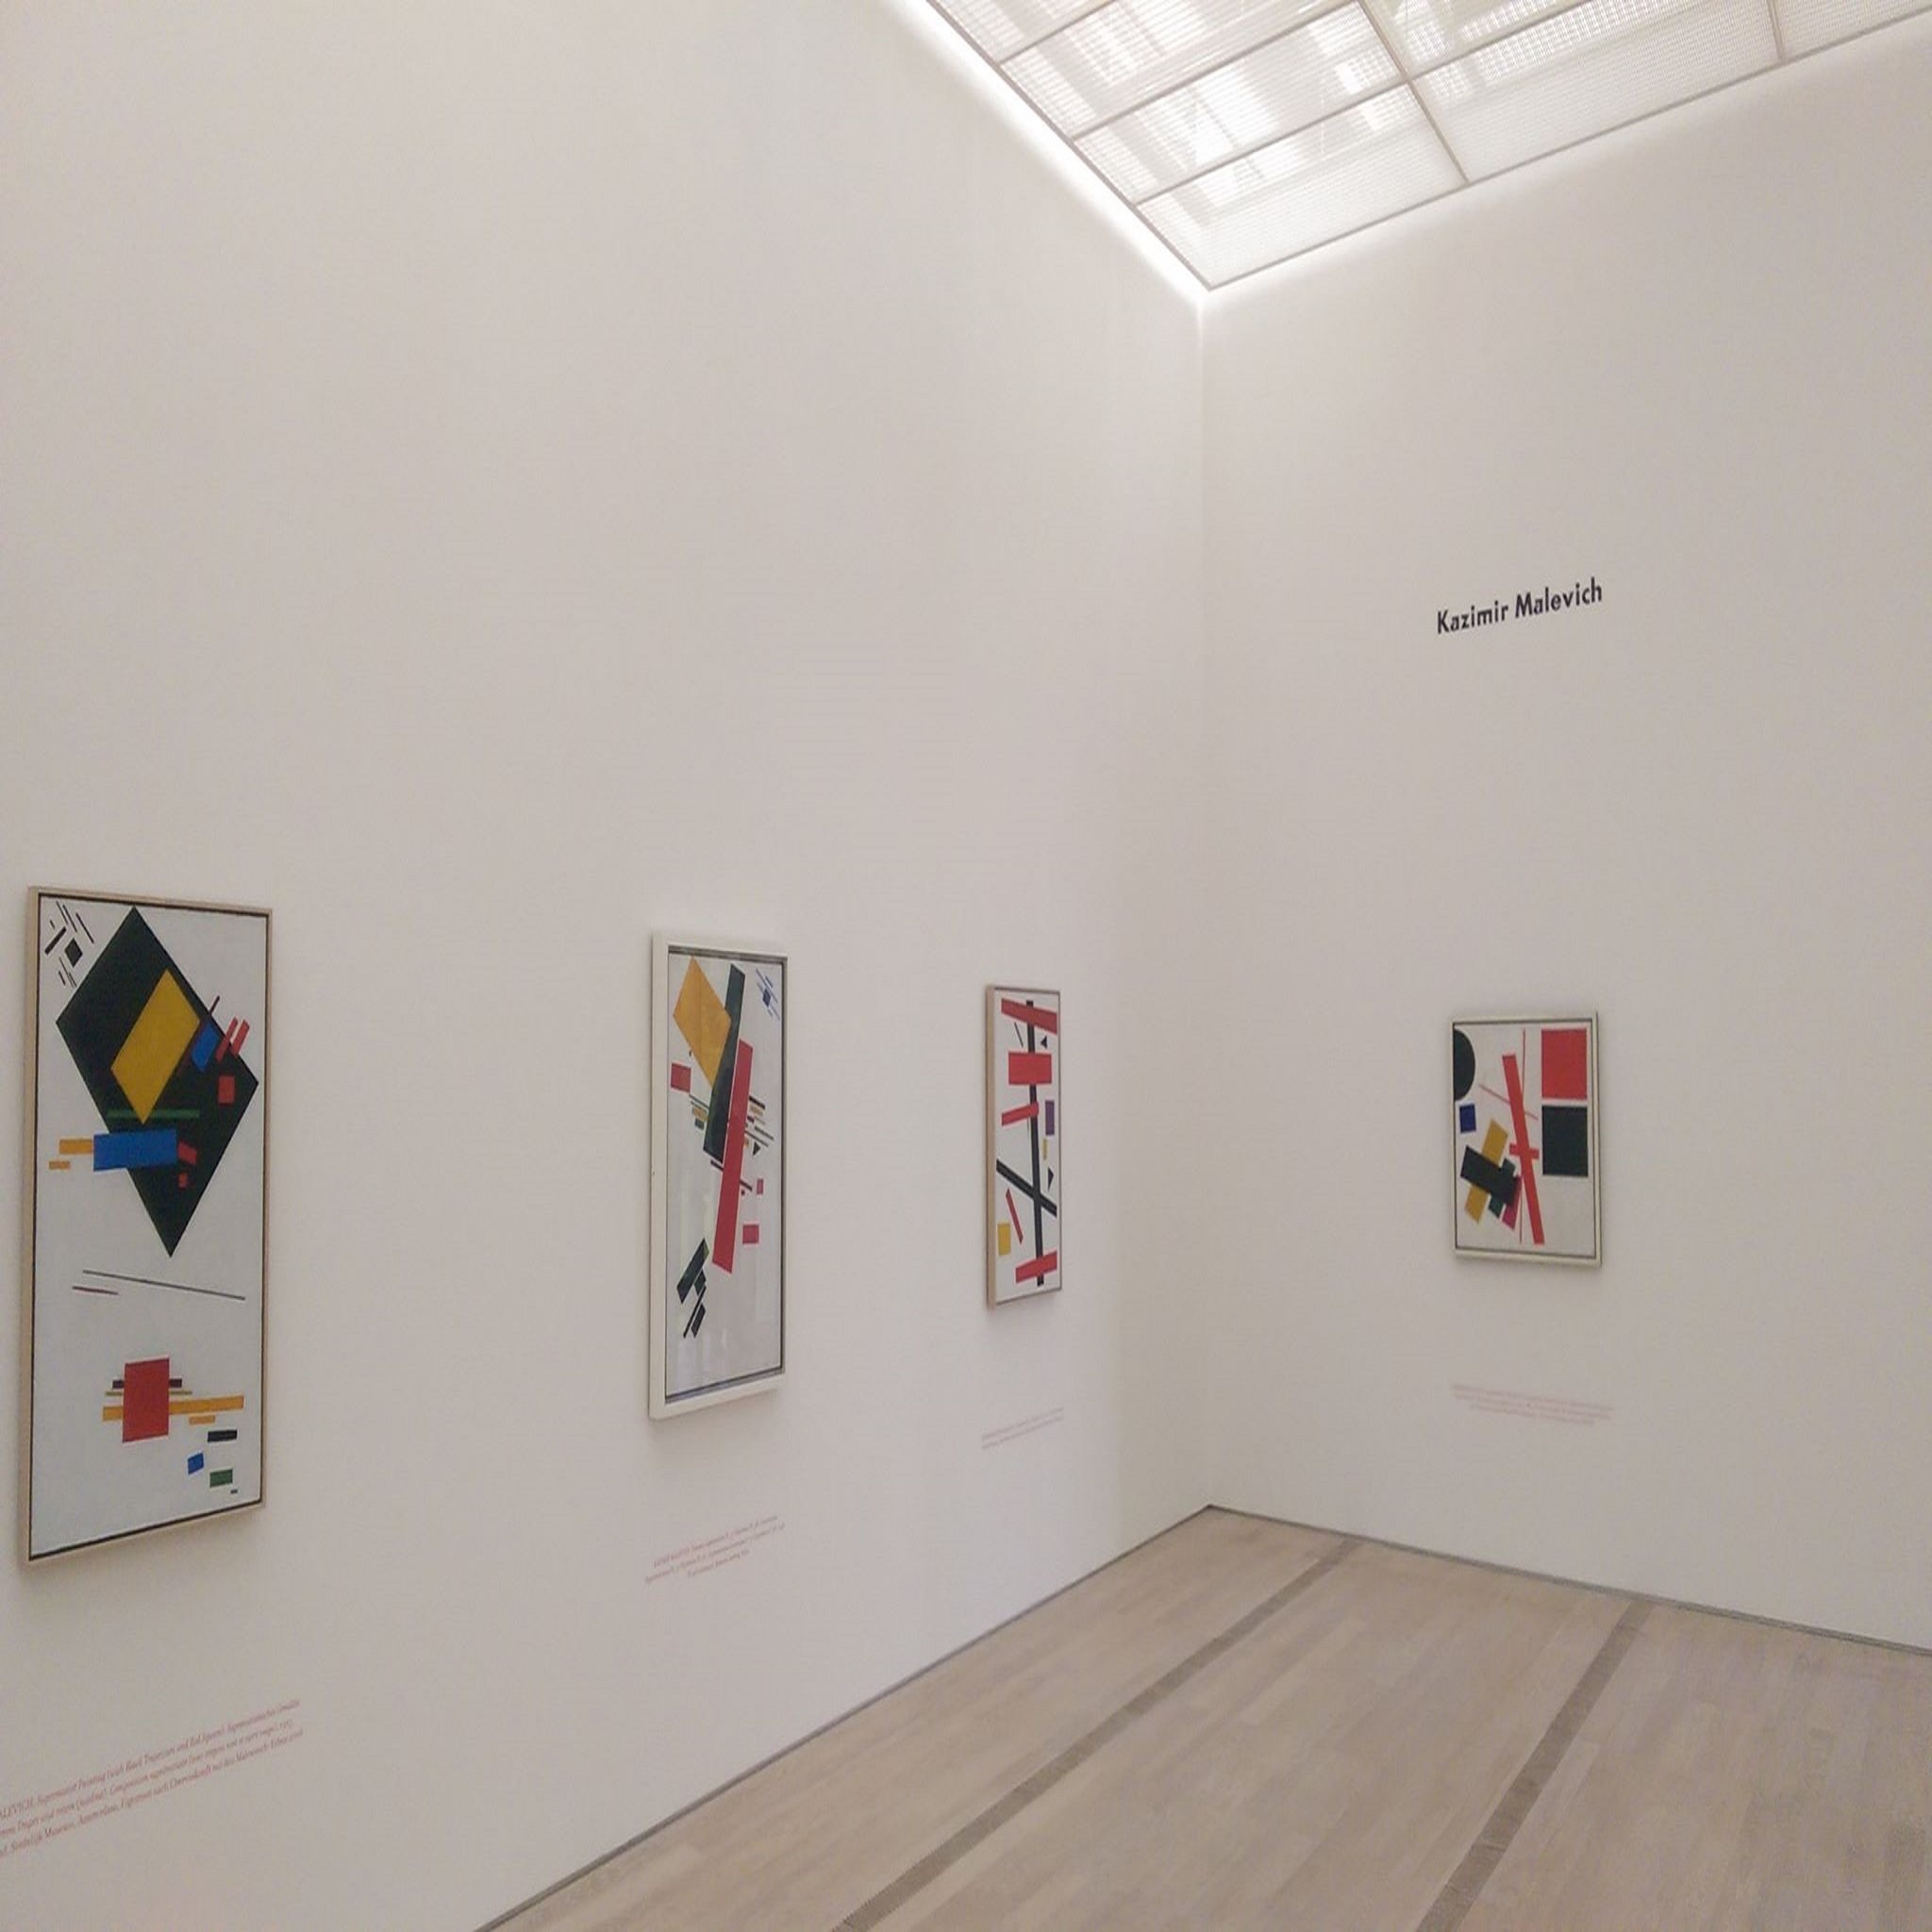 The exhibition 0.10: Malevich, Tatlin and the birth of new systems in art